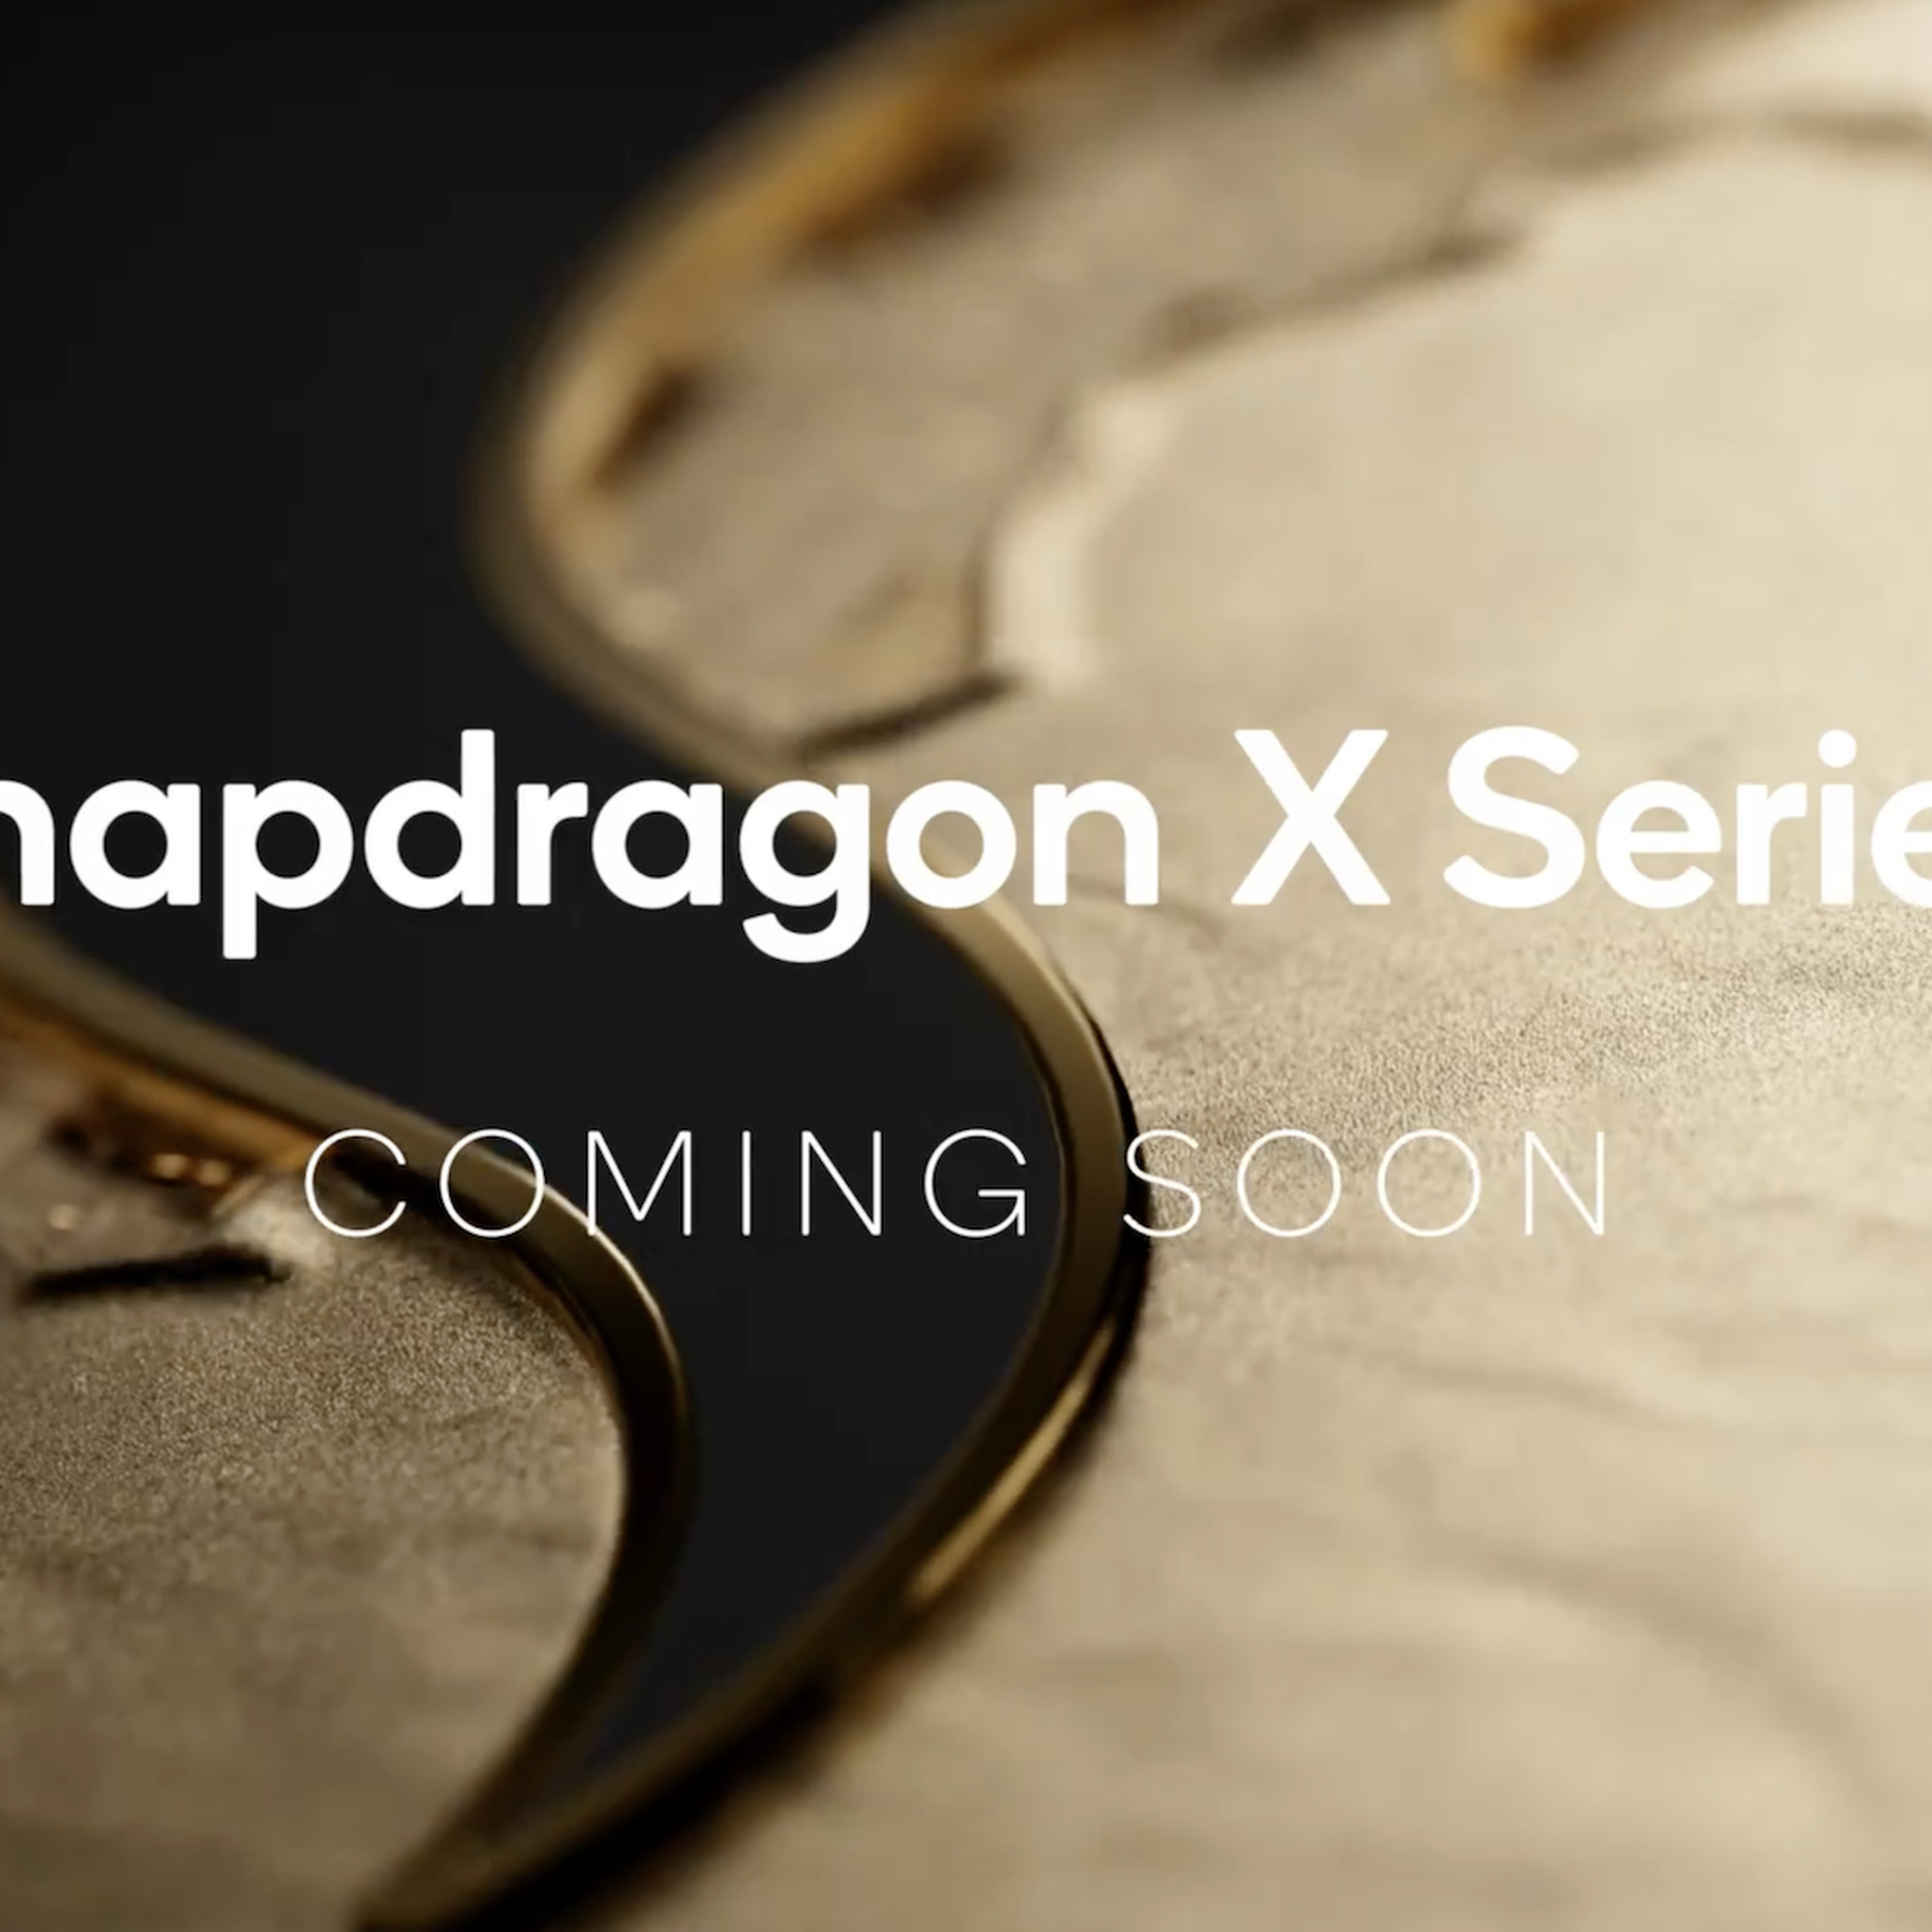 An image of the words “Snapdragon X Series” and “coming soon.”